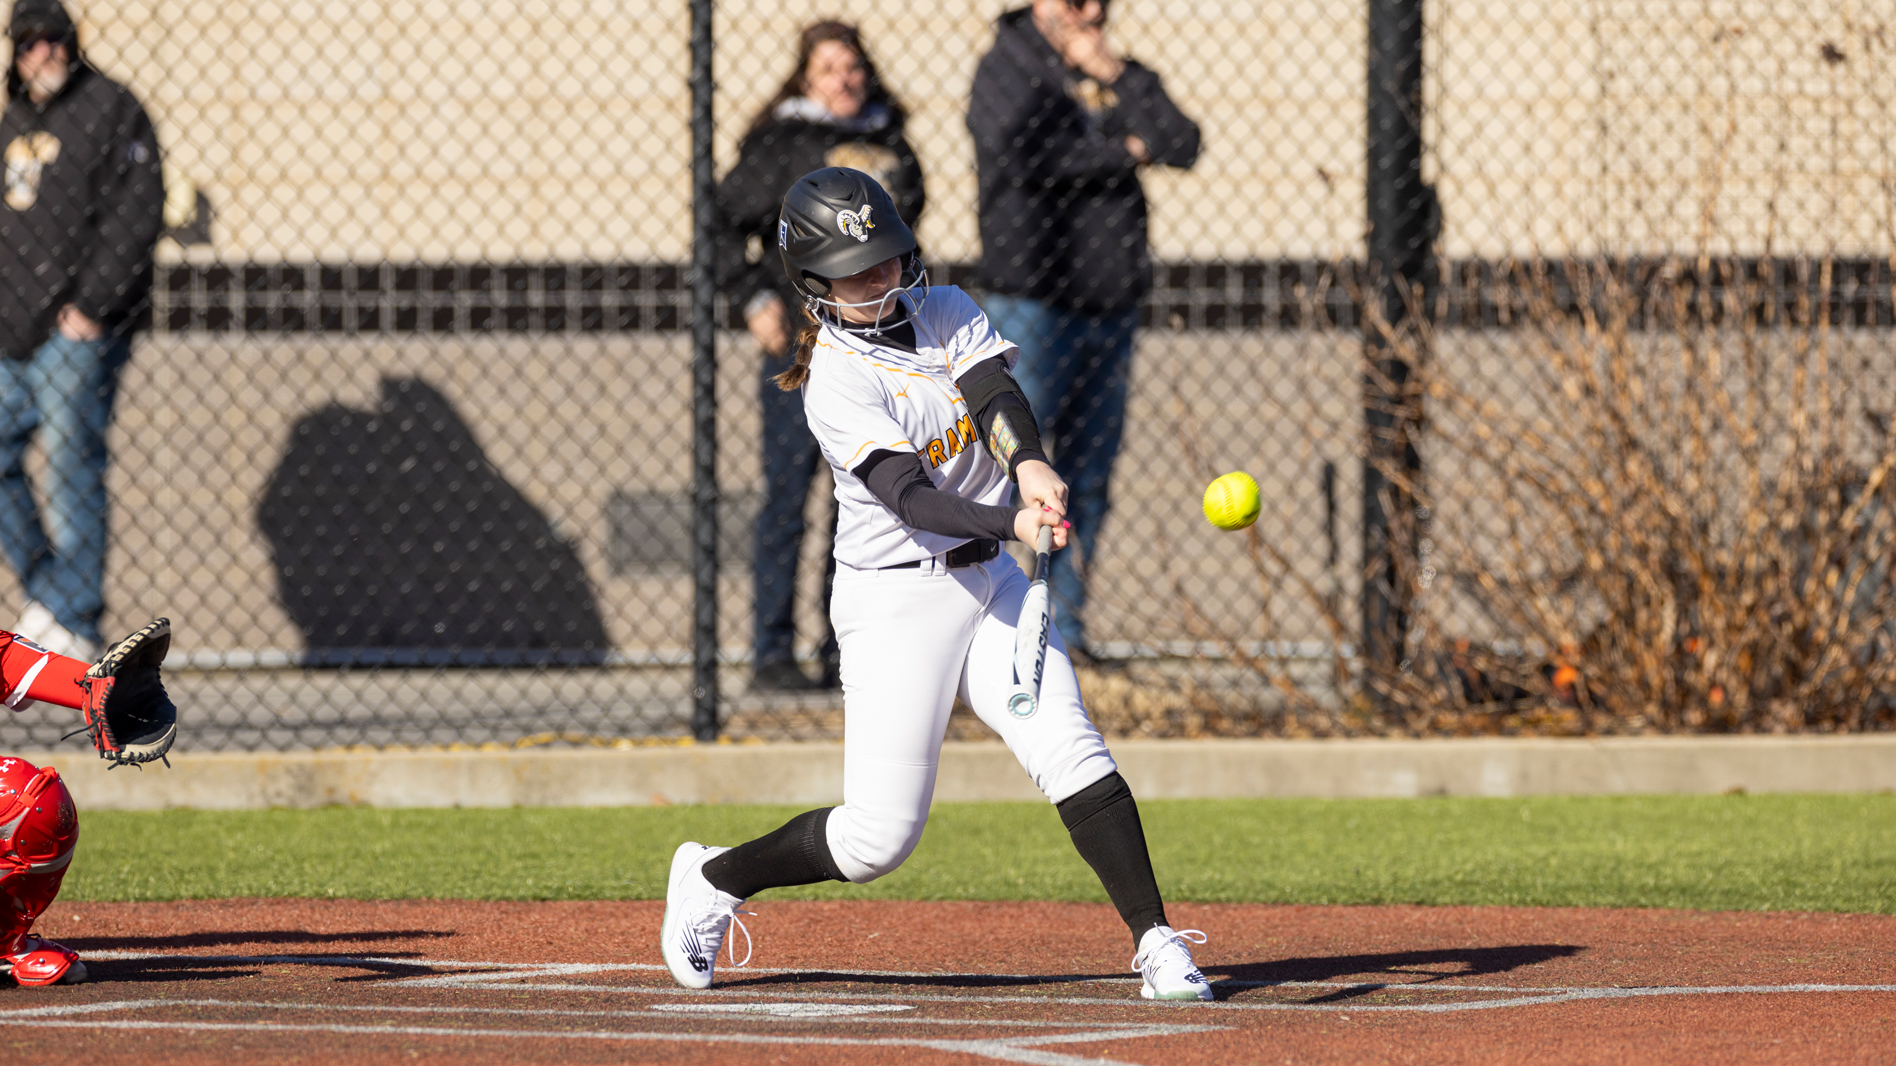 Second Seed Softball Falls to Top Seed Westfield State 8-7 in MASCAC Tournament Semifinals – Rams to Face Worcester Later Today in an Elimination Game